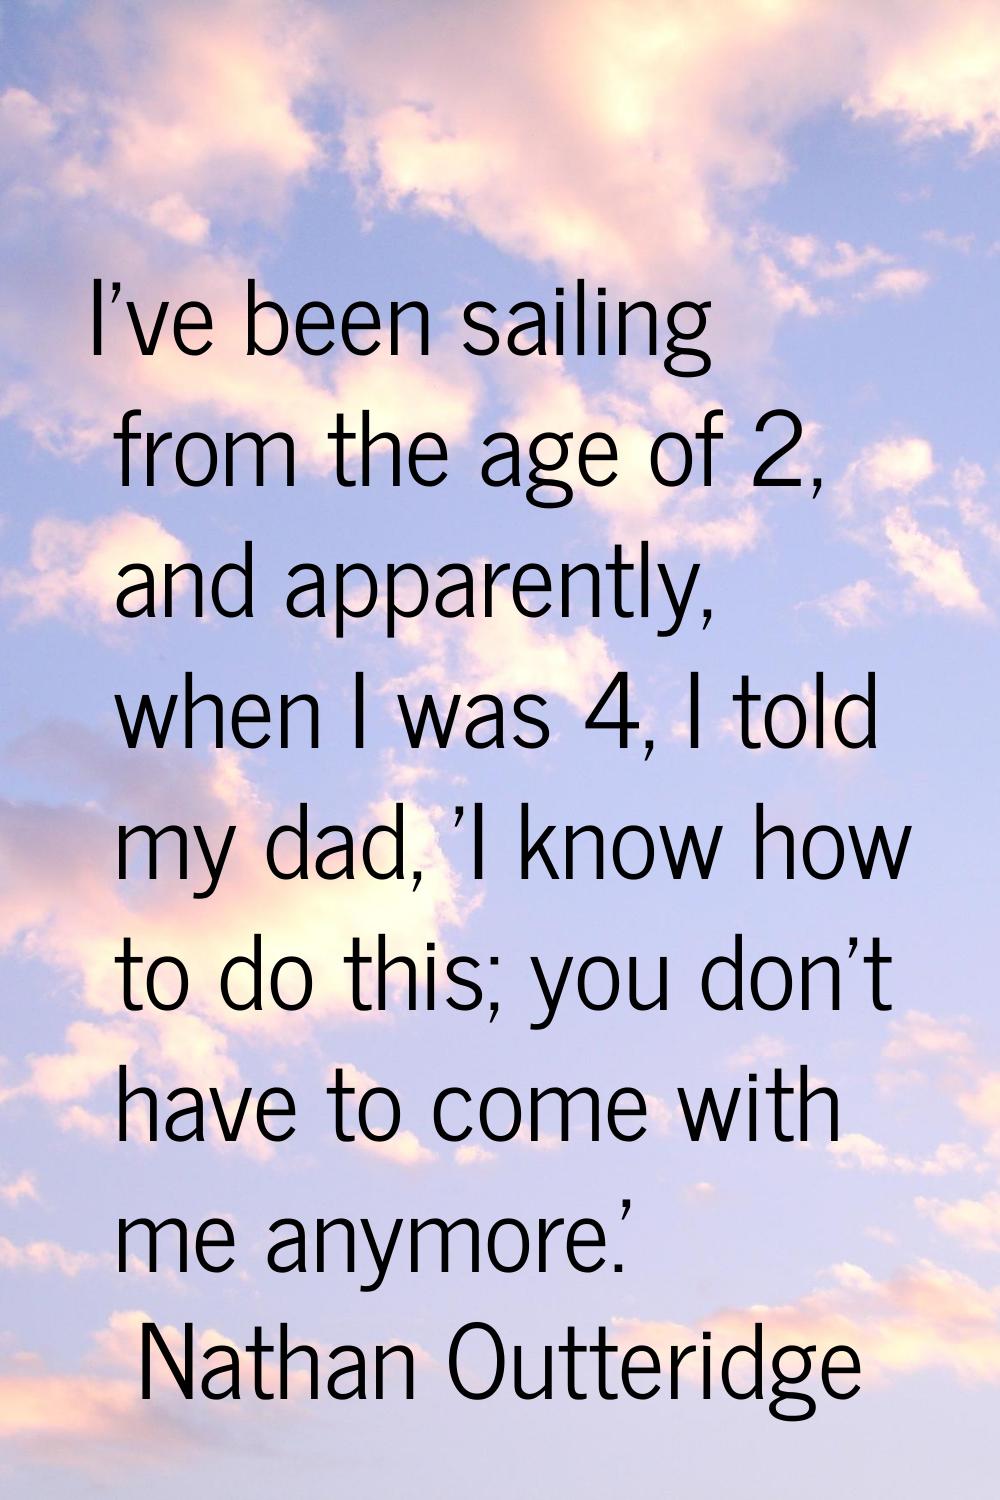 I've been sailing from the age of 2, and apparently, when I was 4, I told my dad, 'I know how to do